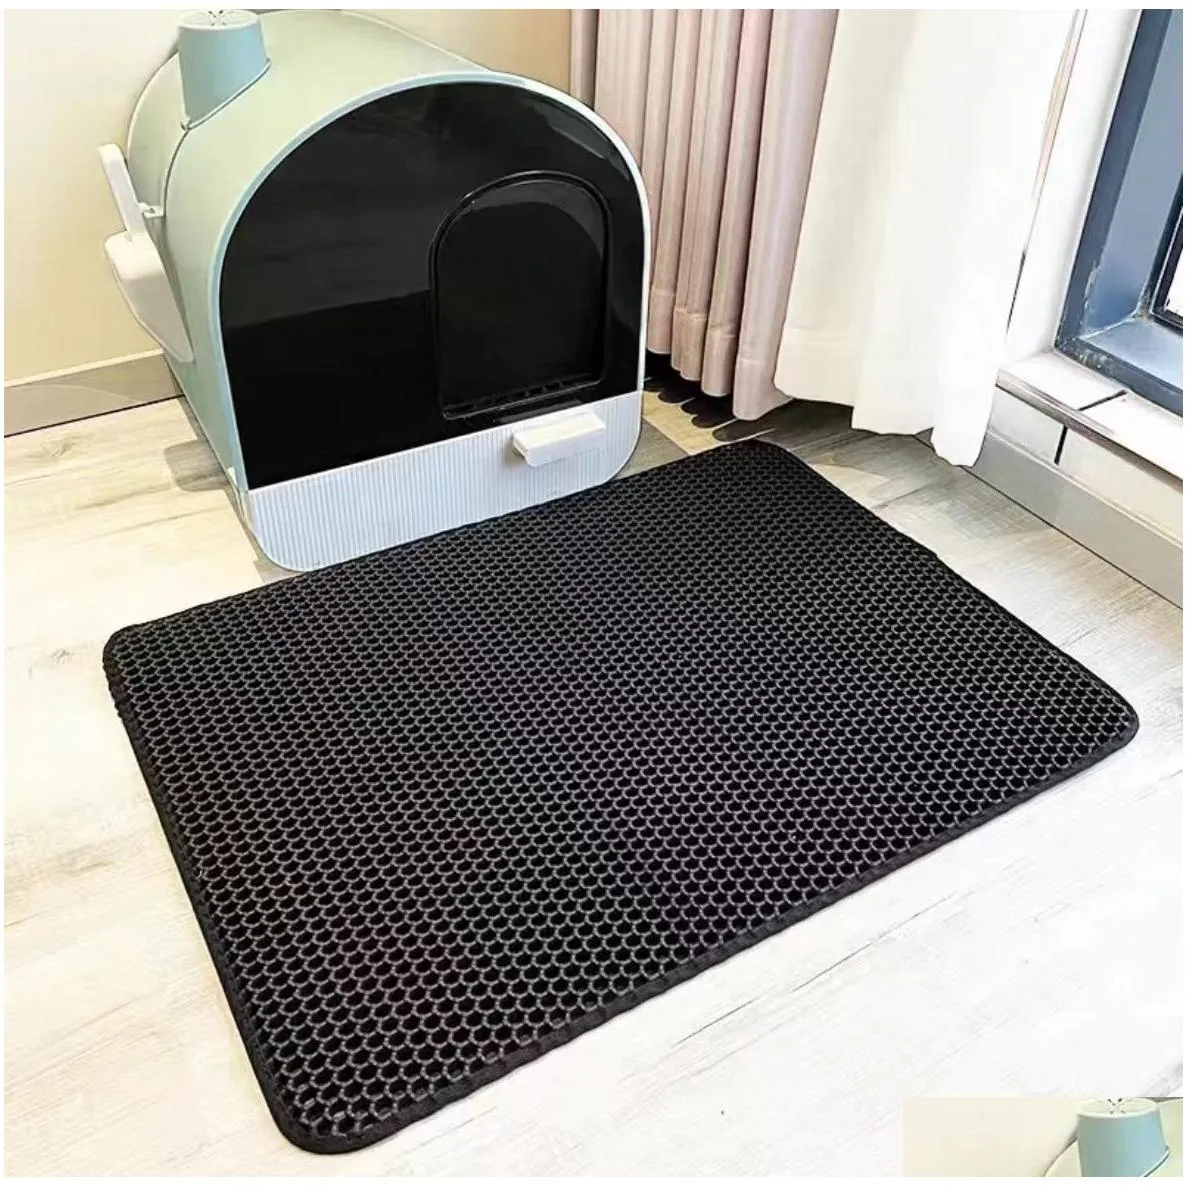 fold double layer pet litter box mat waterproof filters pads nonslip keep bed house clean trapping kitten sand wholesale price